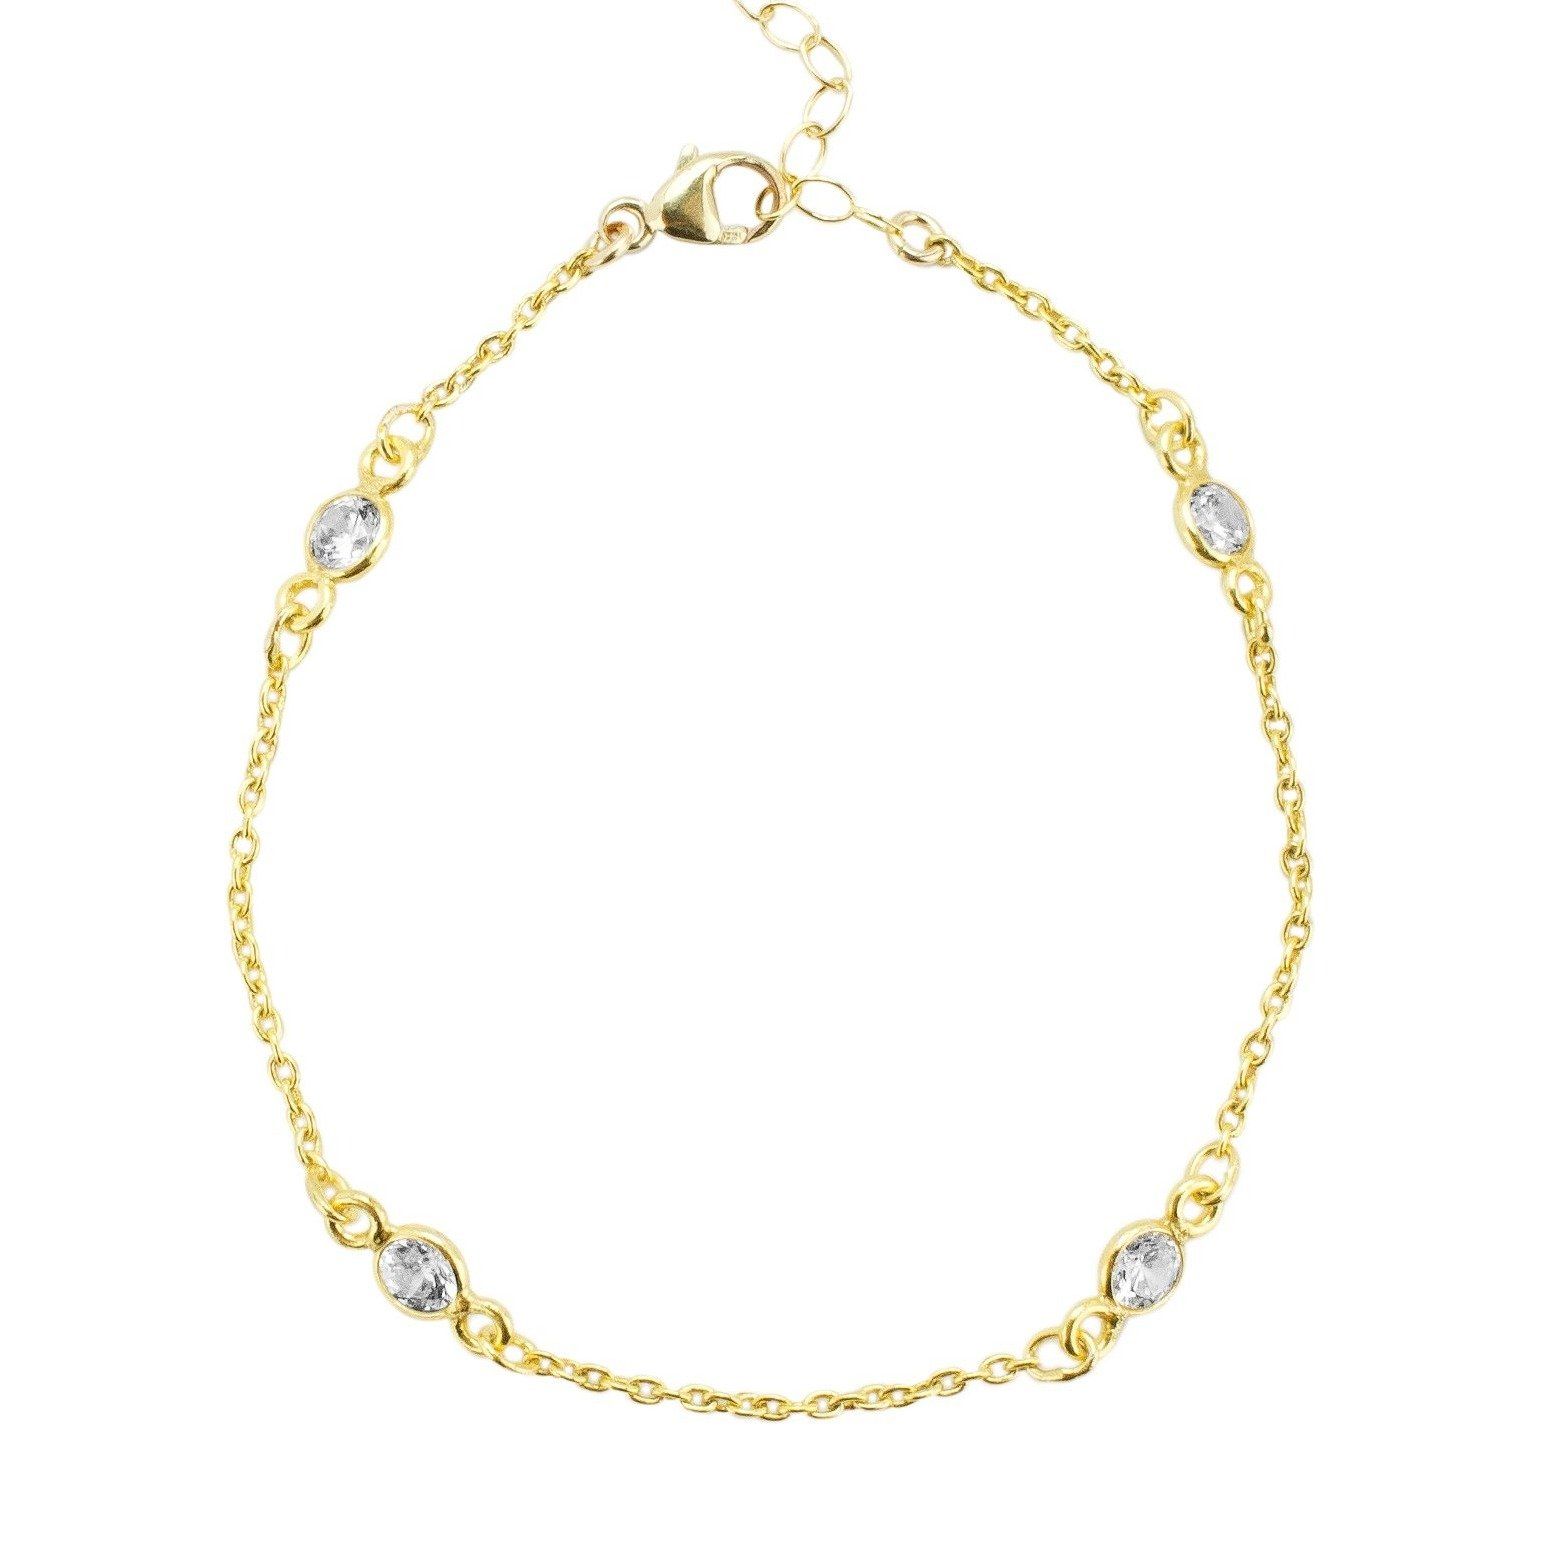 Crystal Chain Bracelet by Katie Dean Jewelry shown against a white background.